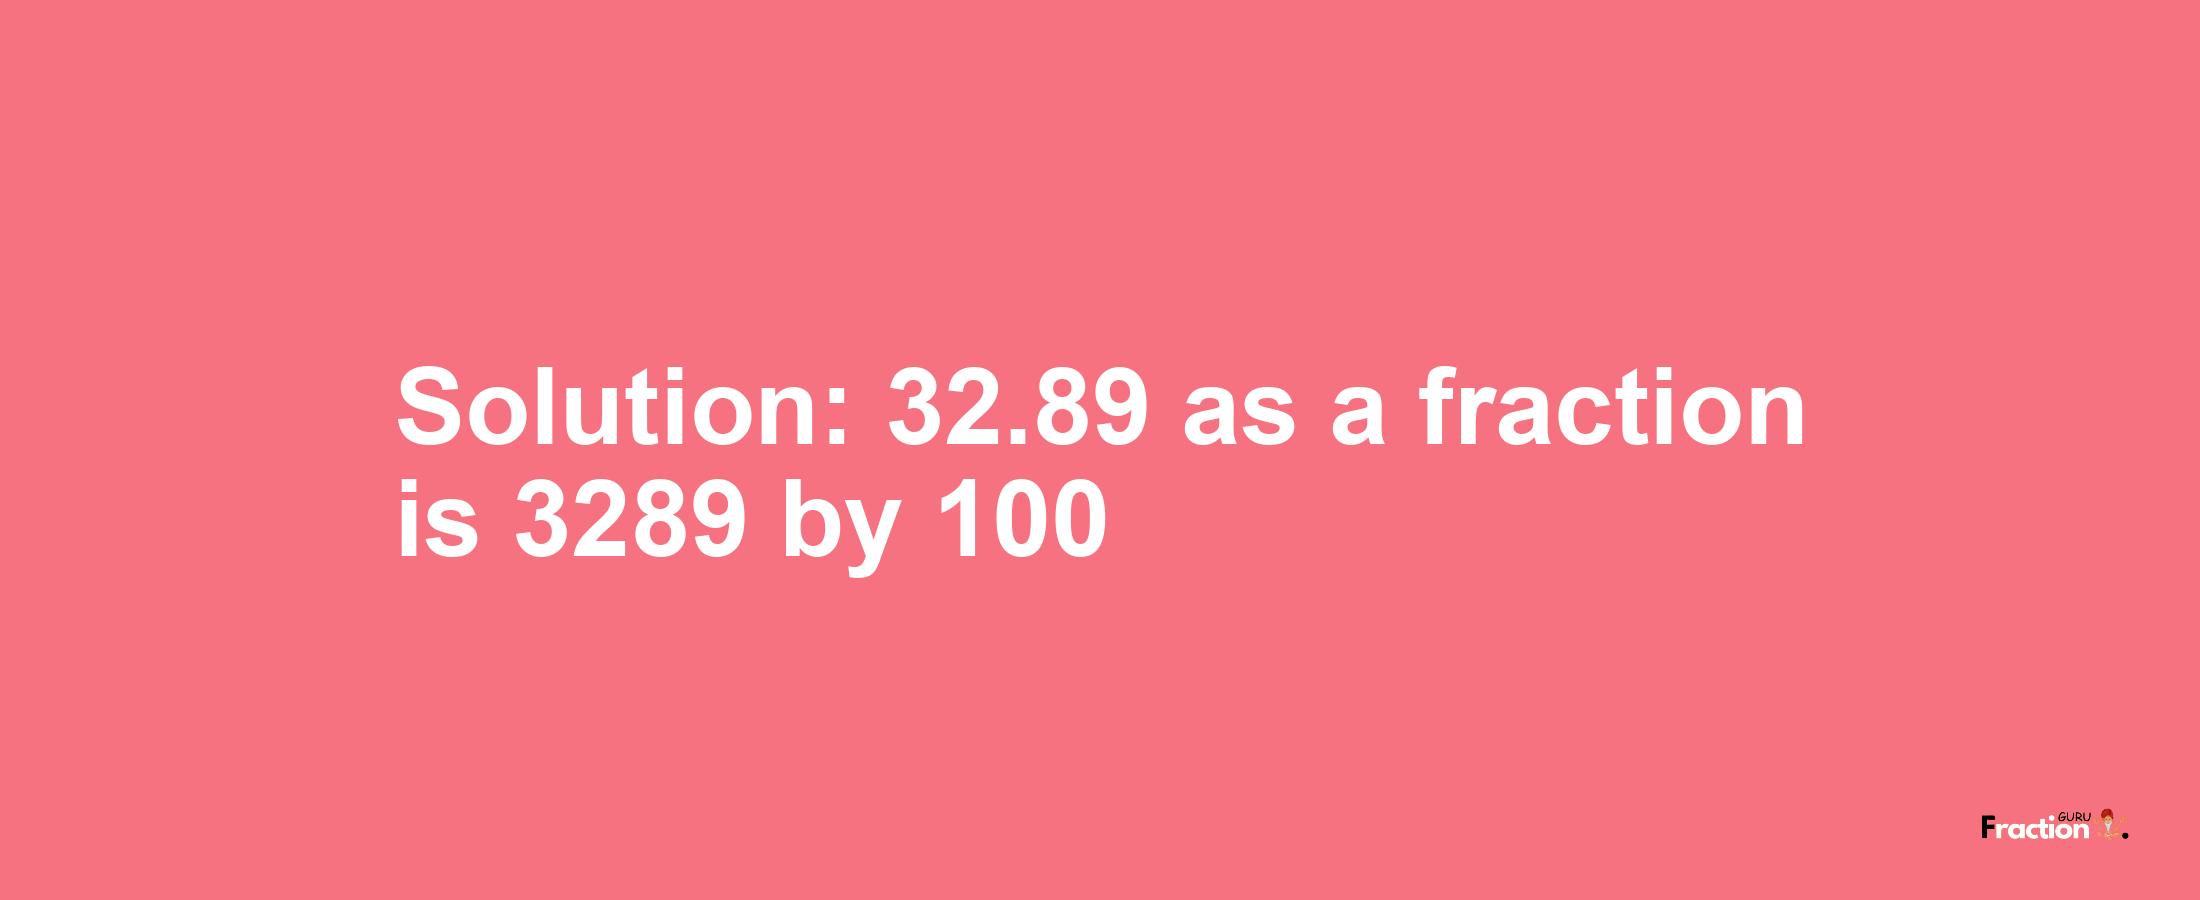 Solution:32.89 as a fraction is 3289/100